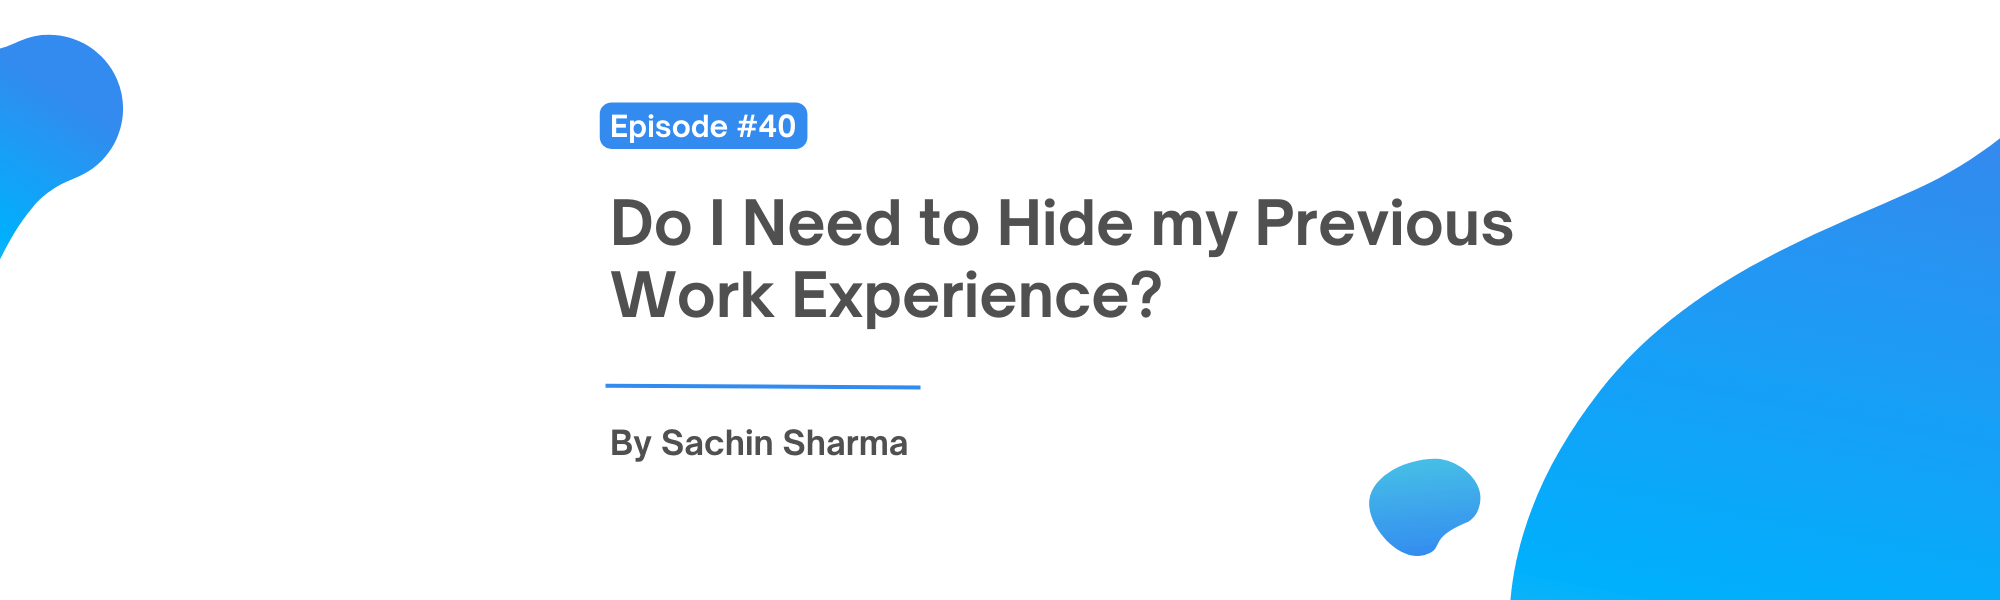 Do I Need to Hide my Previous Work Experience?